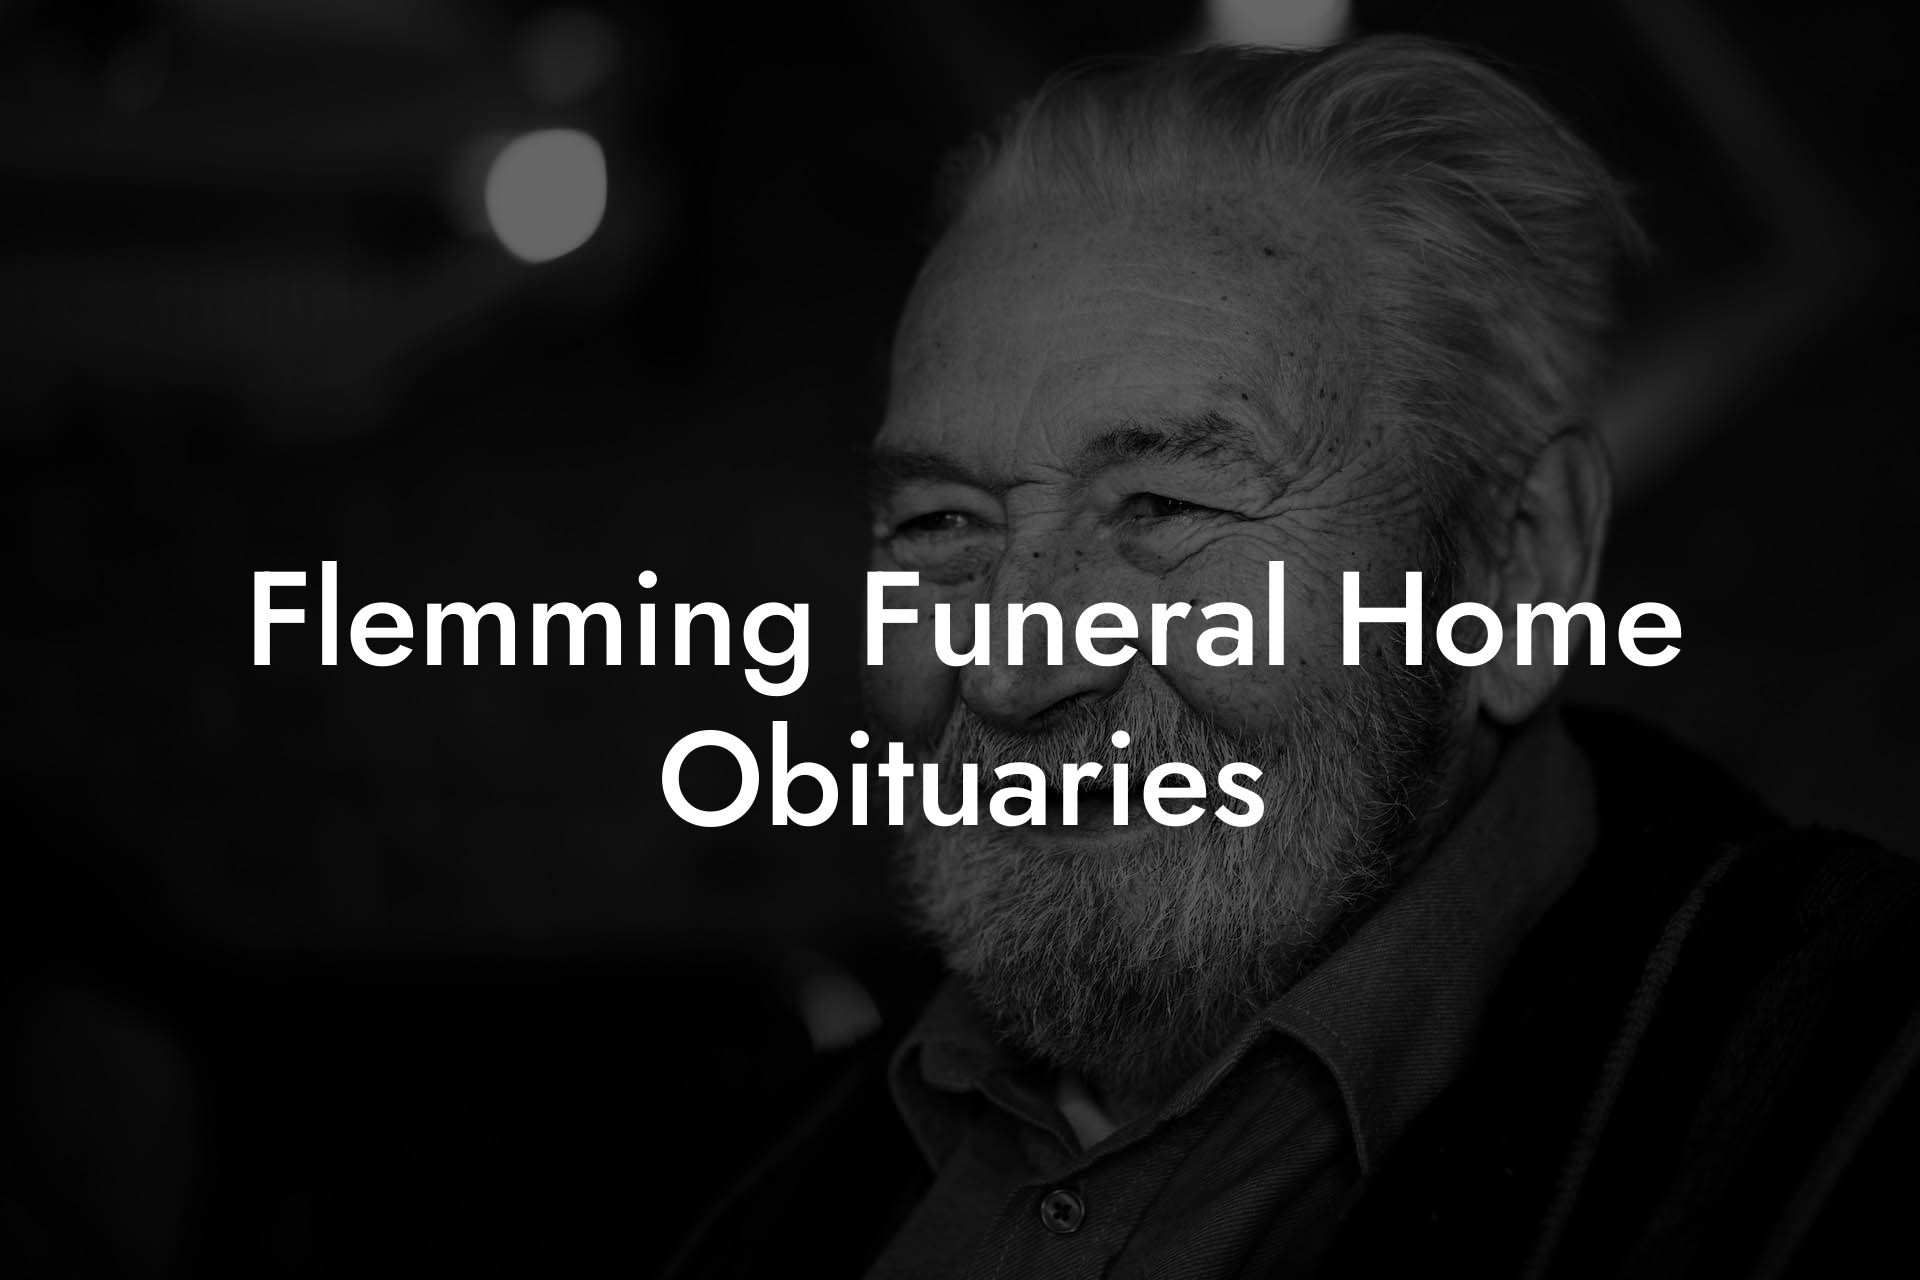 Flemming Funeral Home Obituaries